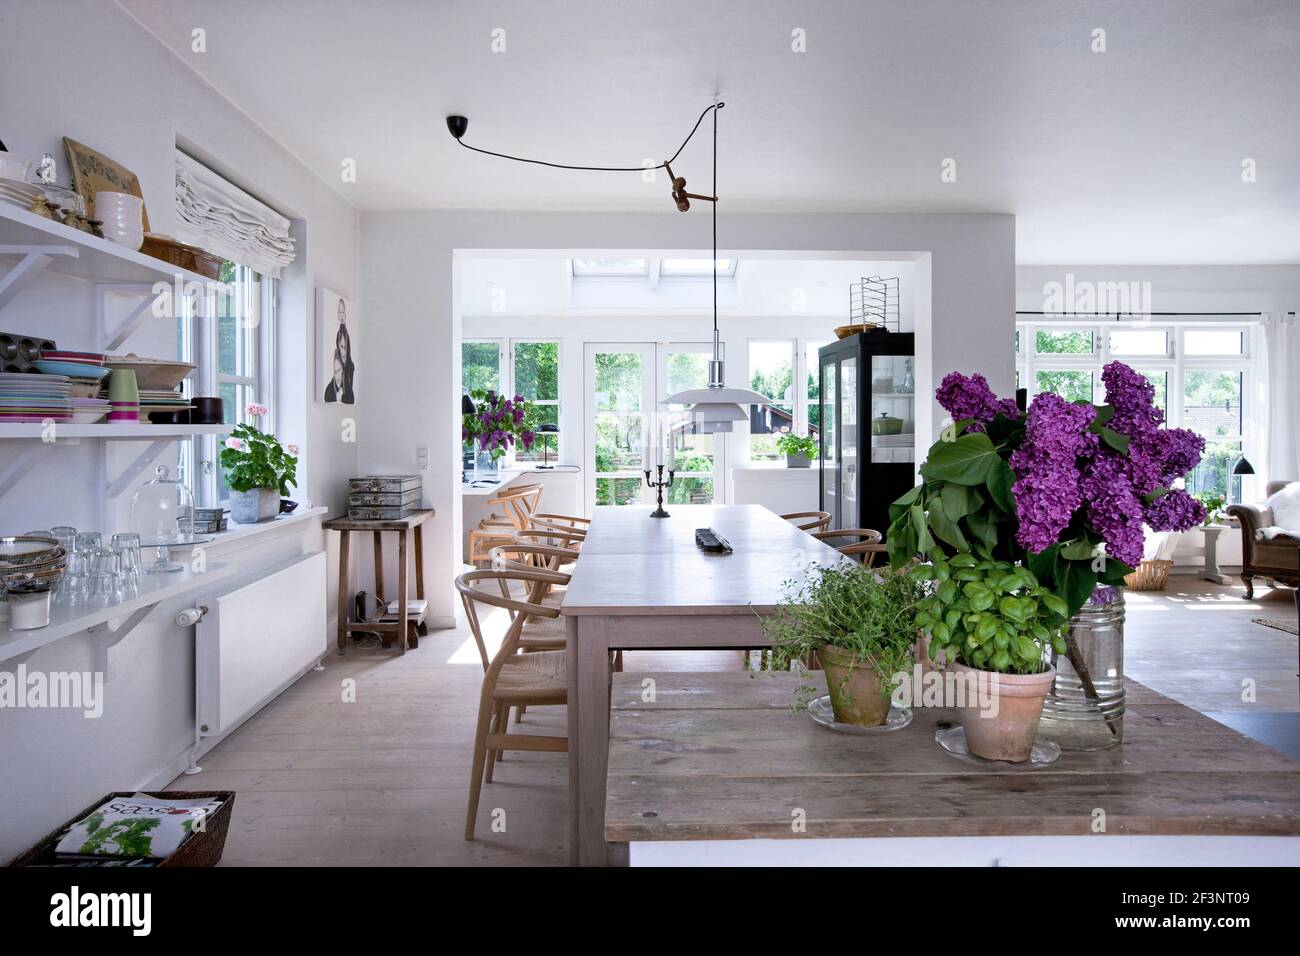 Bright, friendly and cozy, Scandinavia. An airy kitchen with white walls and unit doors. An island with flowers. Stock Photo